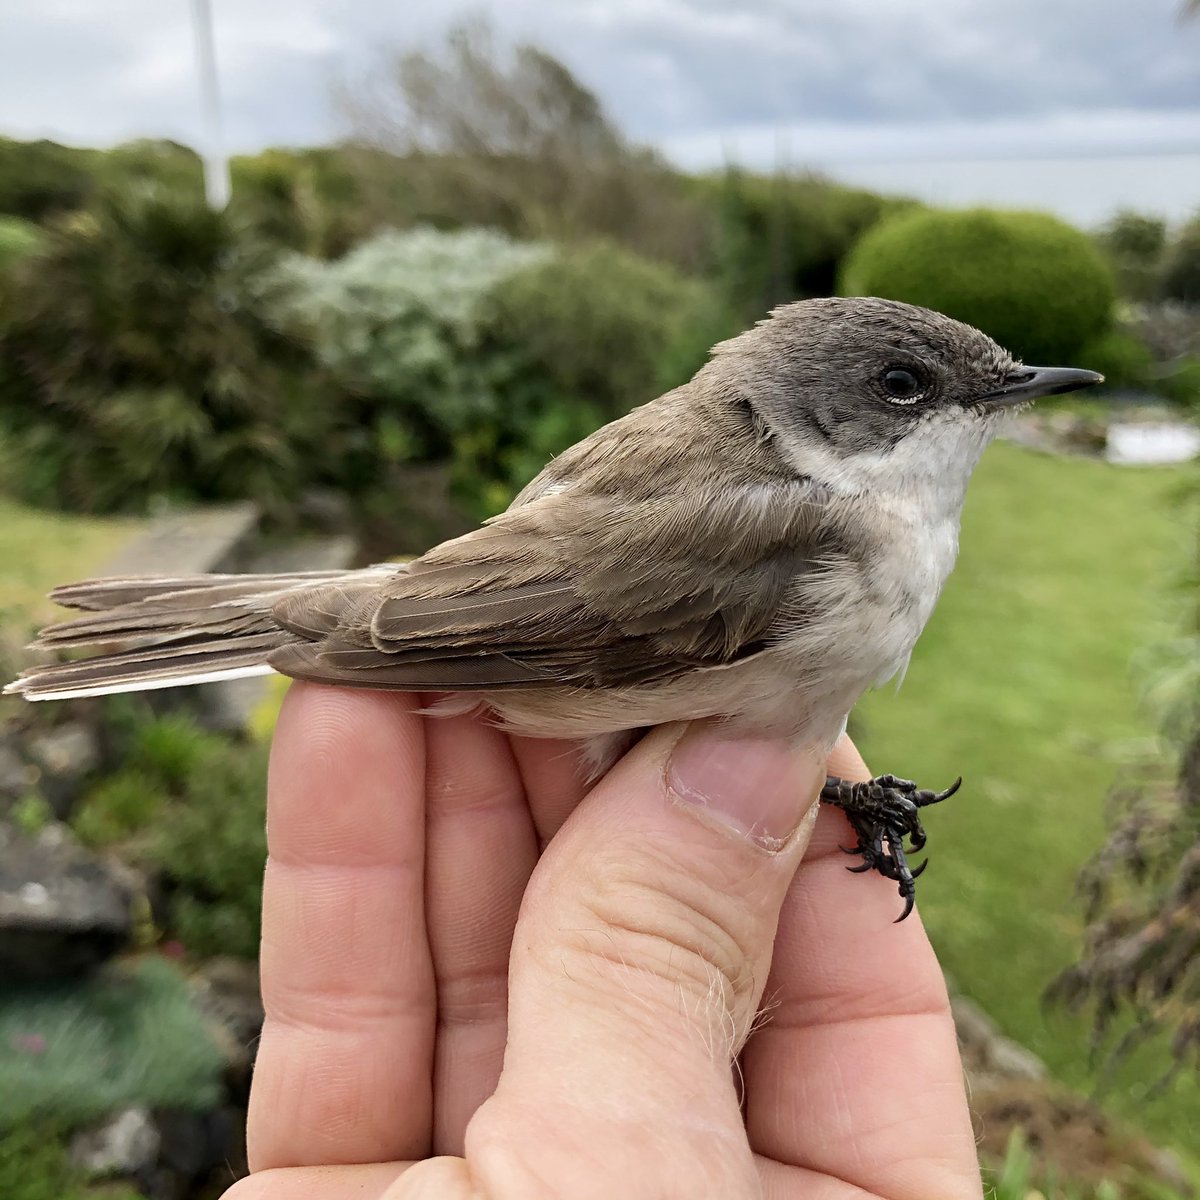 Today saw the first #LesserWhitethroat caught and ringed in the garden this year. #BirdRinging #GowerBirds